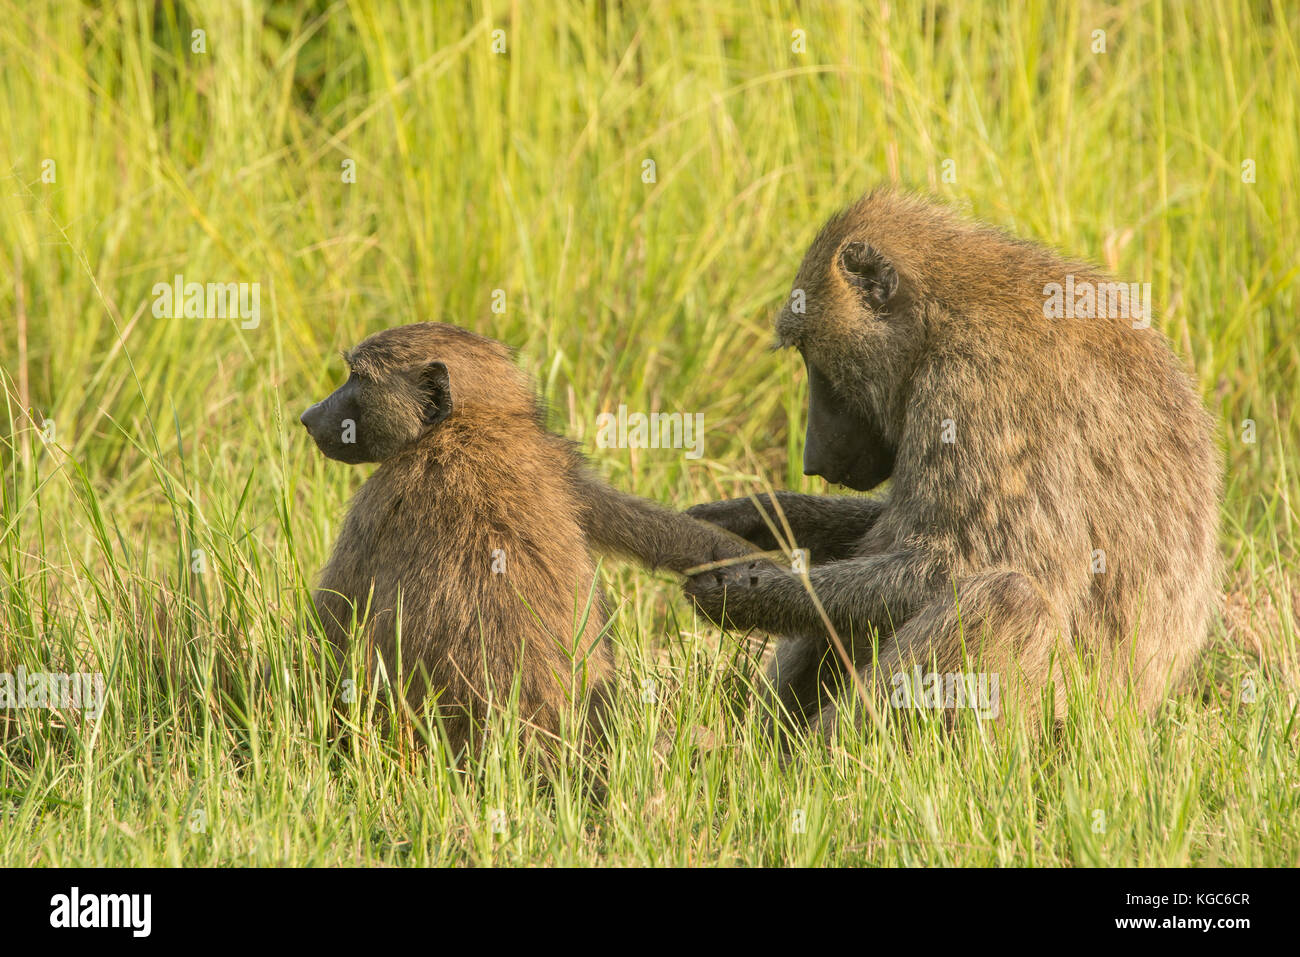 Olive baboon grooming  one of its group. Murchison Falls National Park, Uganda. Stock Photo